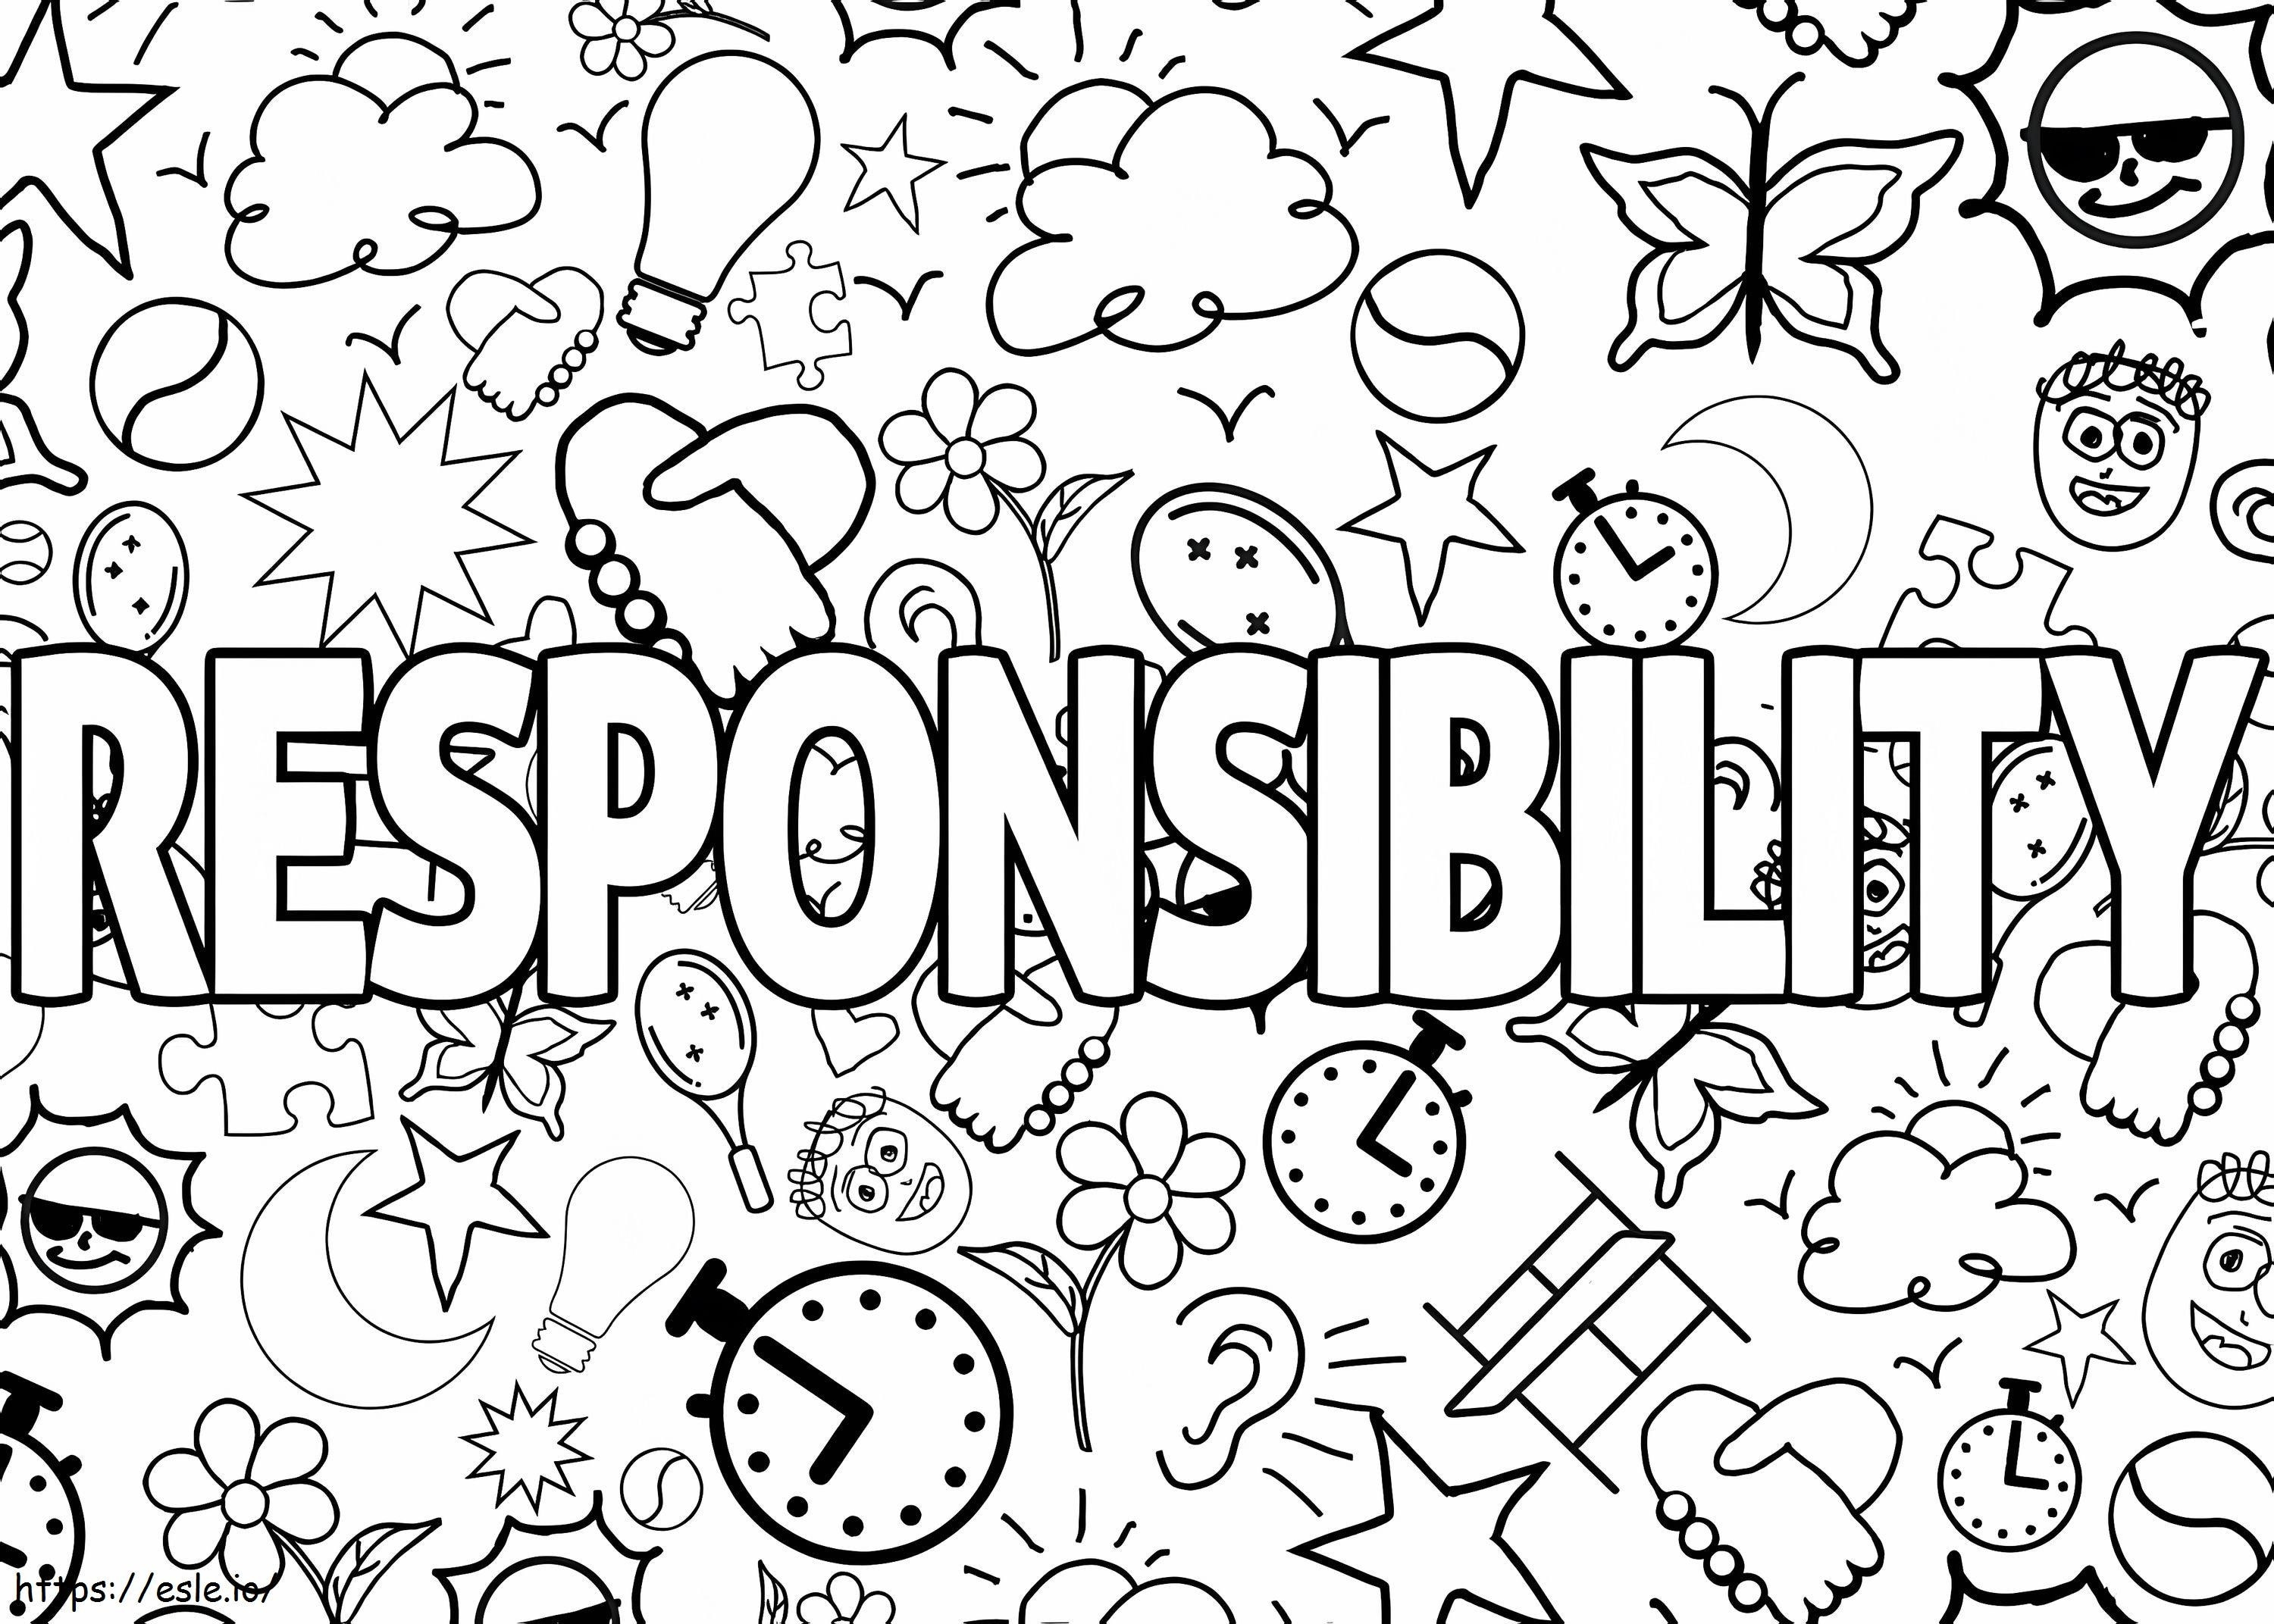 Responsibility 1 coloring page